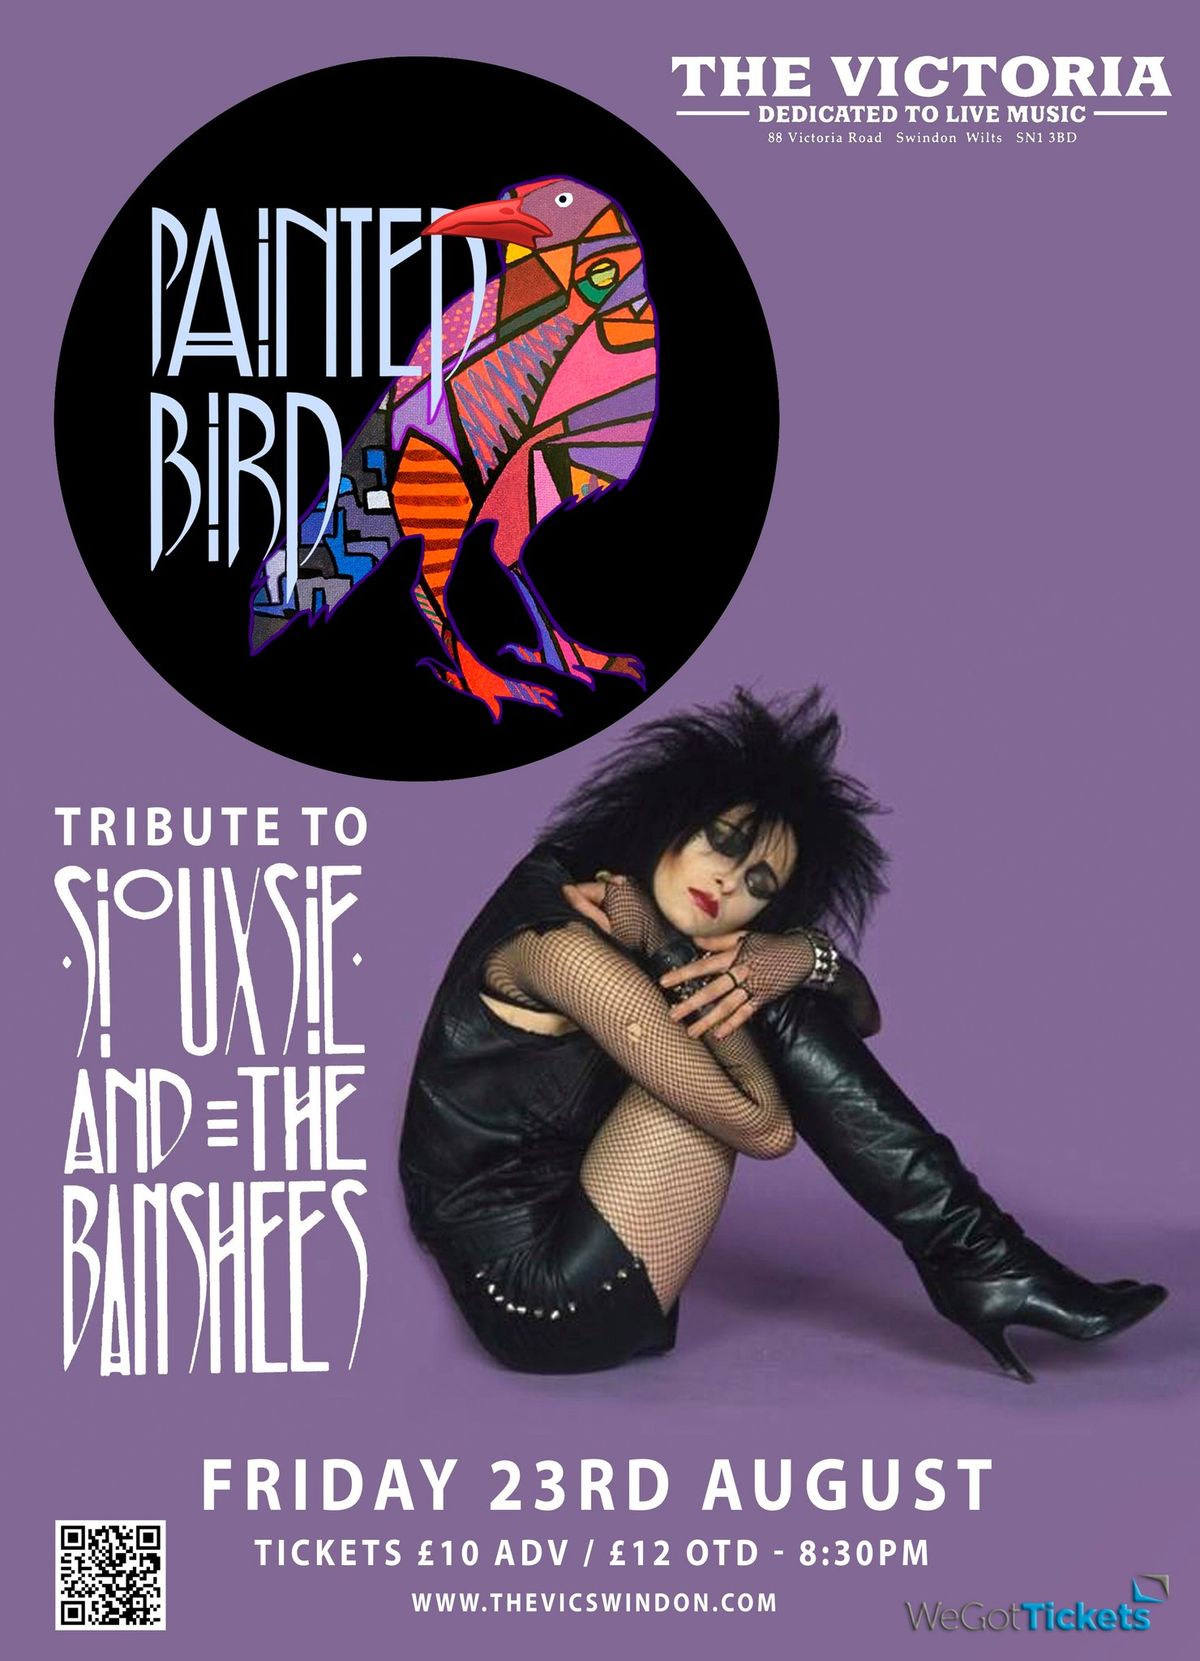 Painted Bird (SIOUXSIE AND THE BANSHEES TRIBUTE) live at The Vic